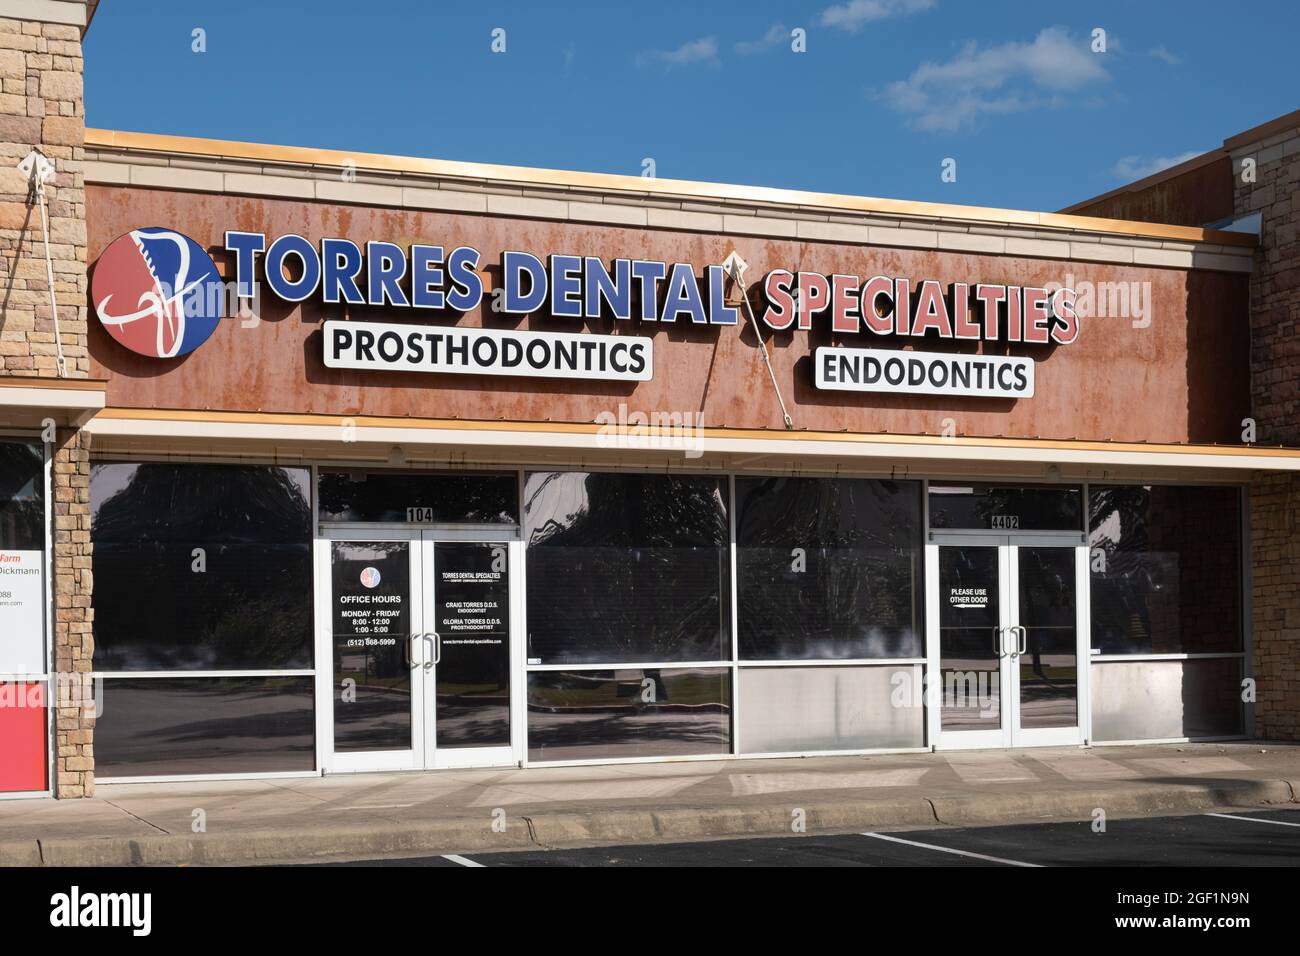 Dental office specializing in prosthodontics and endodoncs Georgetown, TX USA Stock Photo